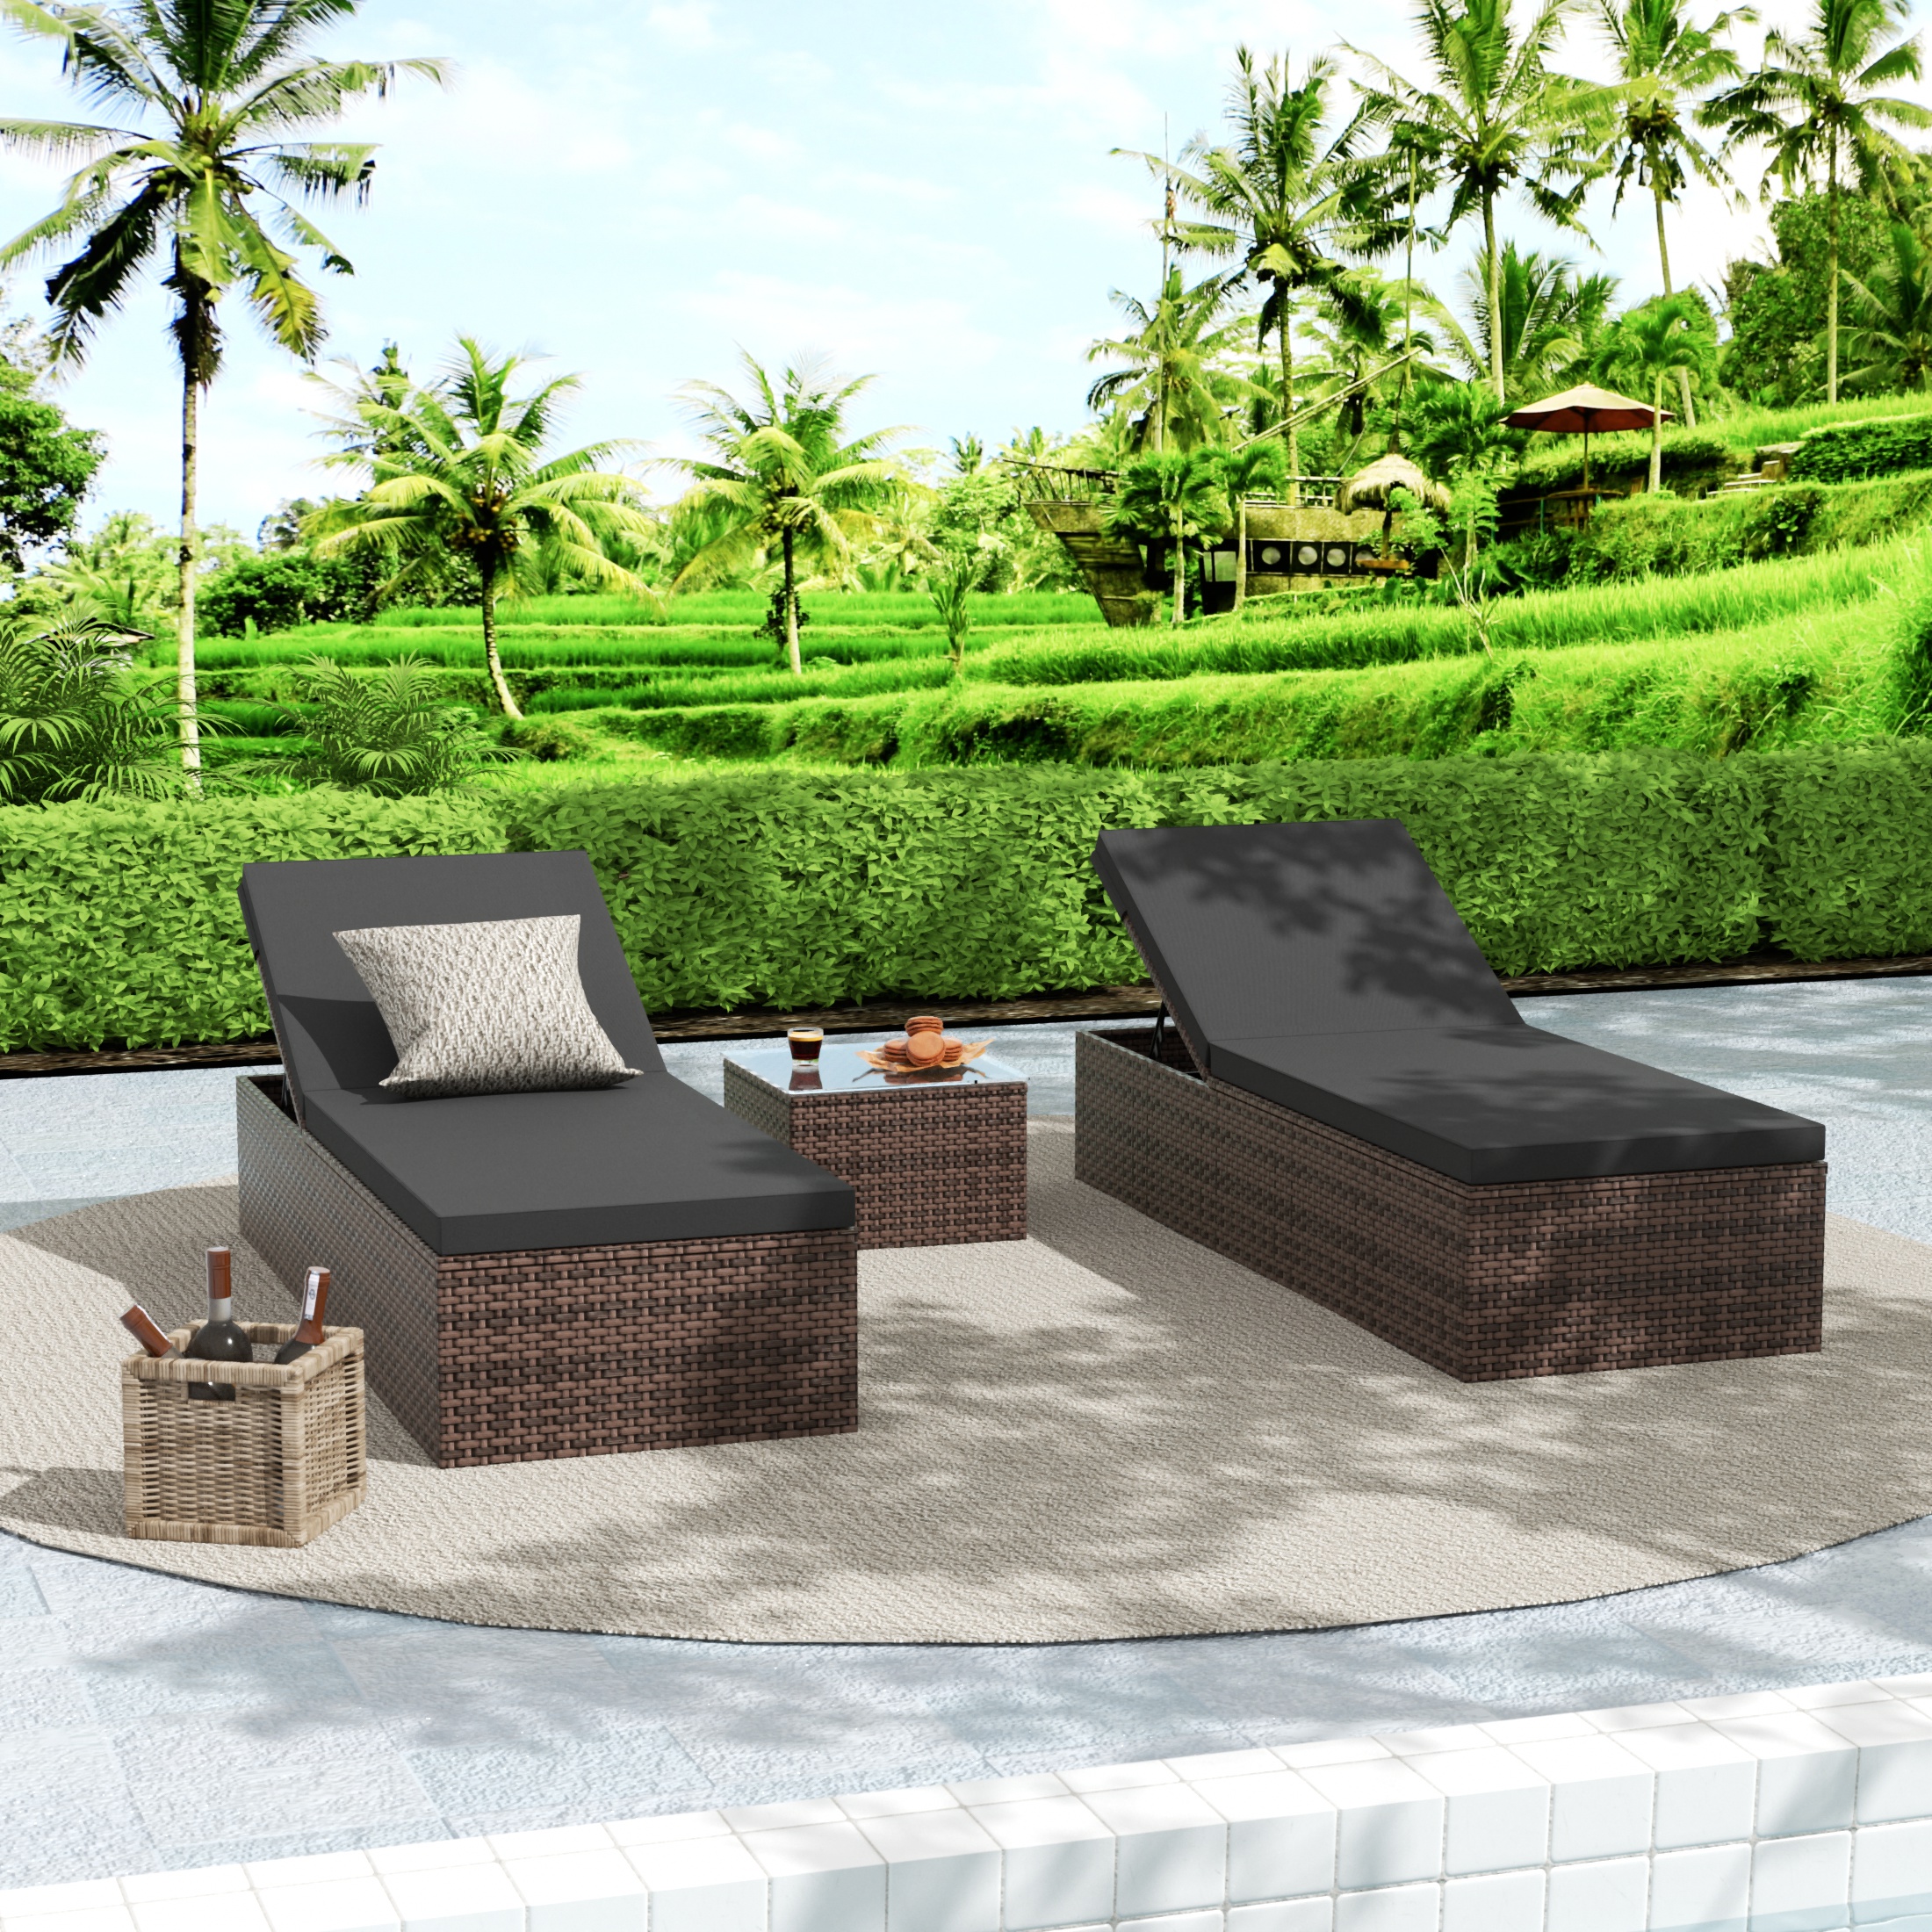 WestinTrends Muriel Wicker Chaise Lounge Outdoor, All Weather 3 Pieces Rattan Patio Pool Lounge Chairs Set of 2 and Tempered Glass Side Table, Gray Cushion - image 2 of 7